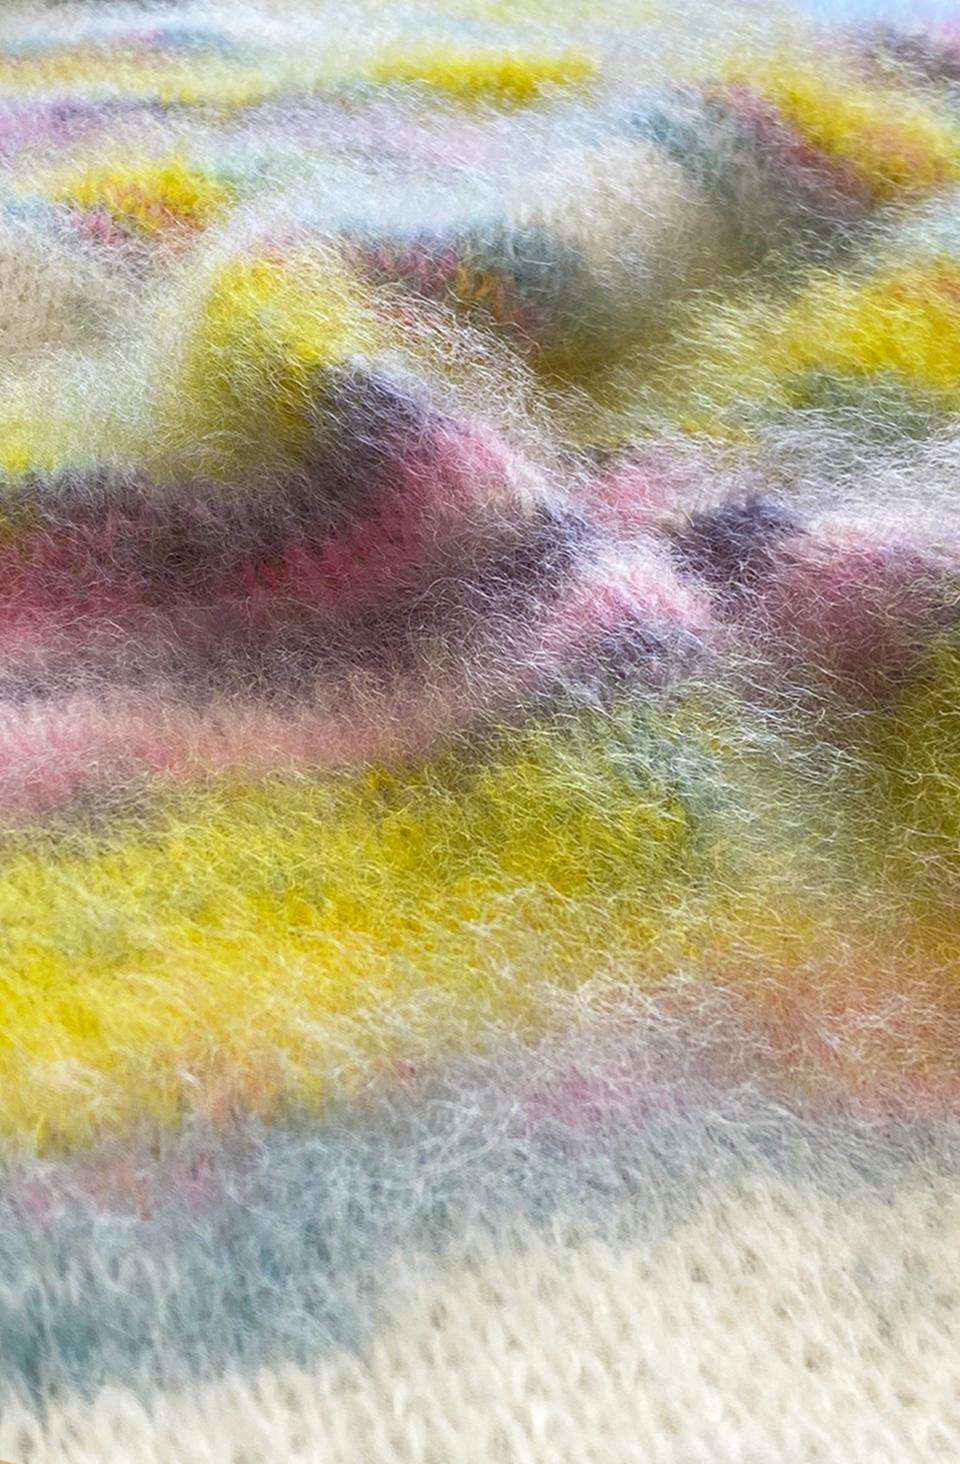 The City Mohair yarn from Lineapiù’s fall 2022 collection. - Credit: Courtesy of Lineapiù